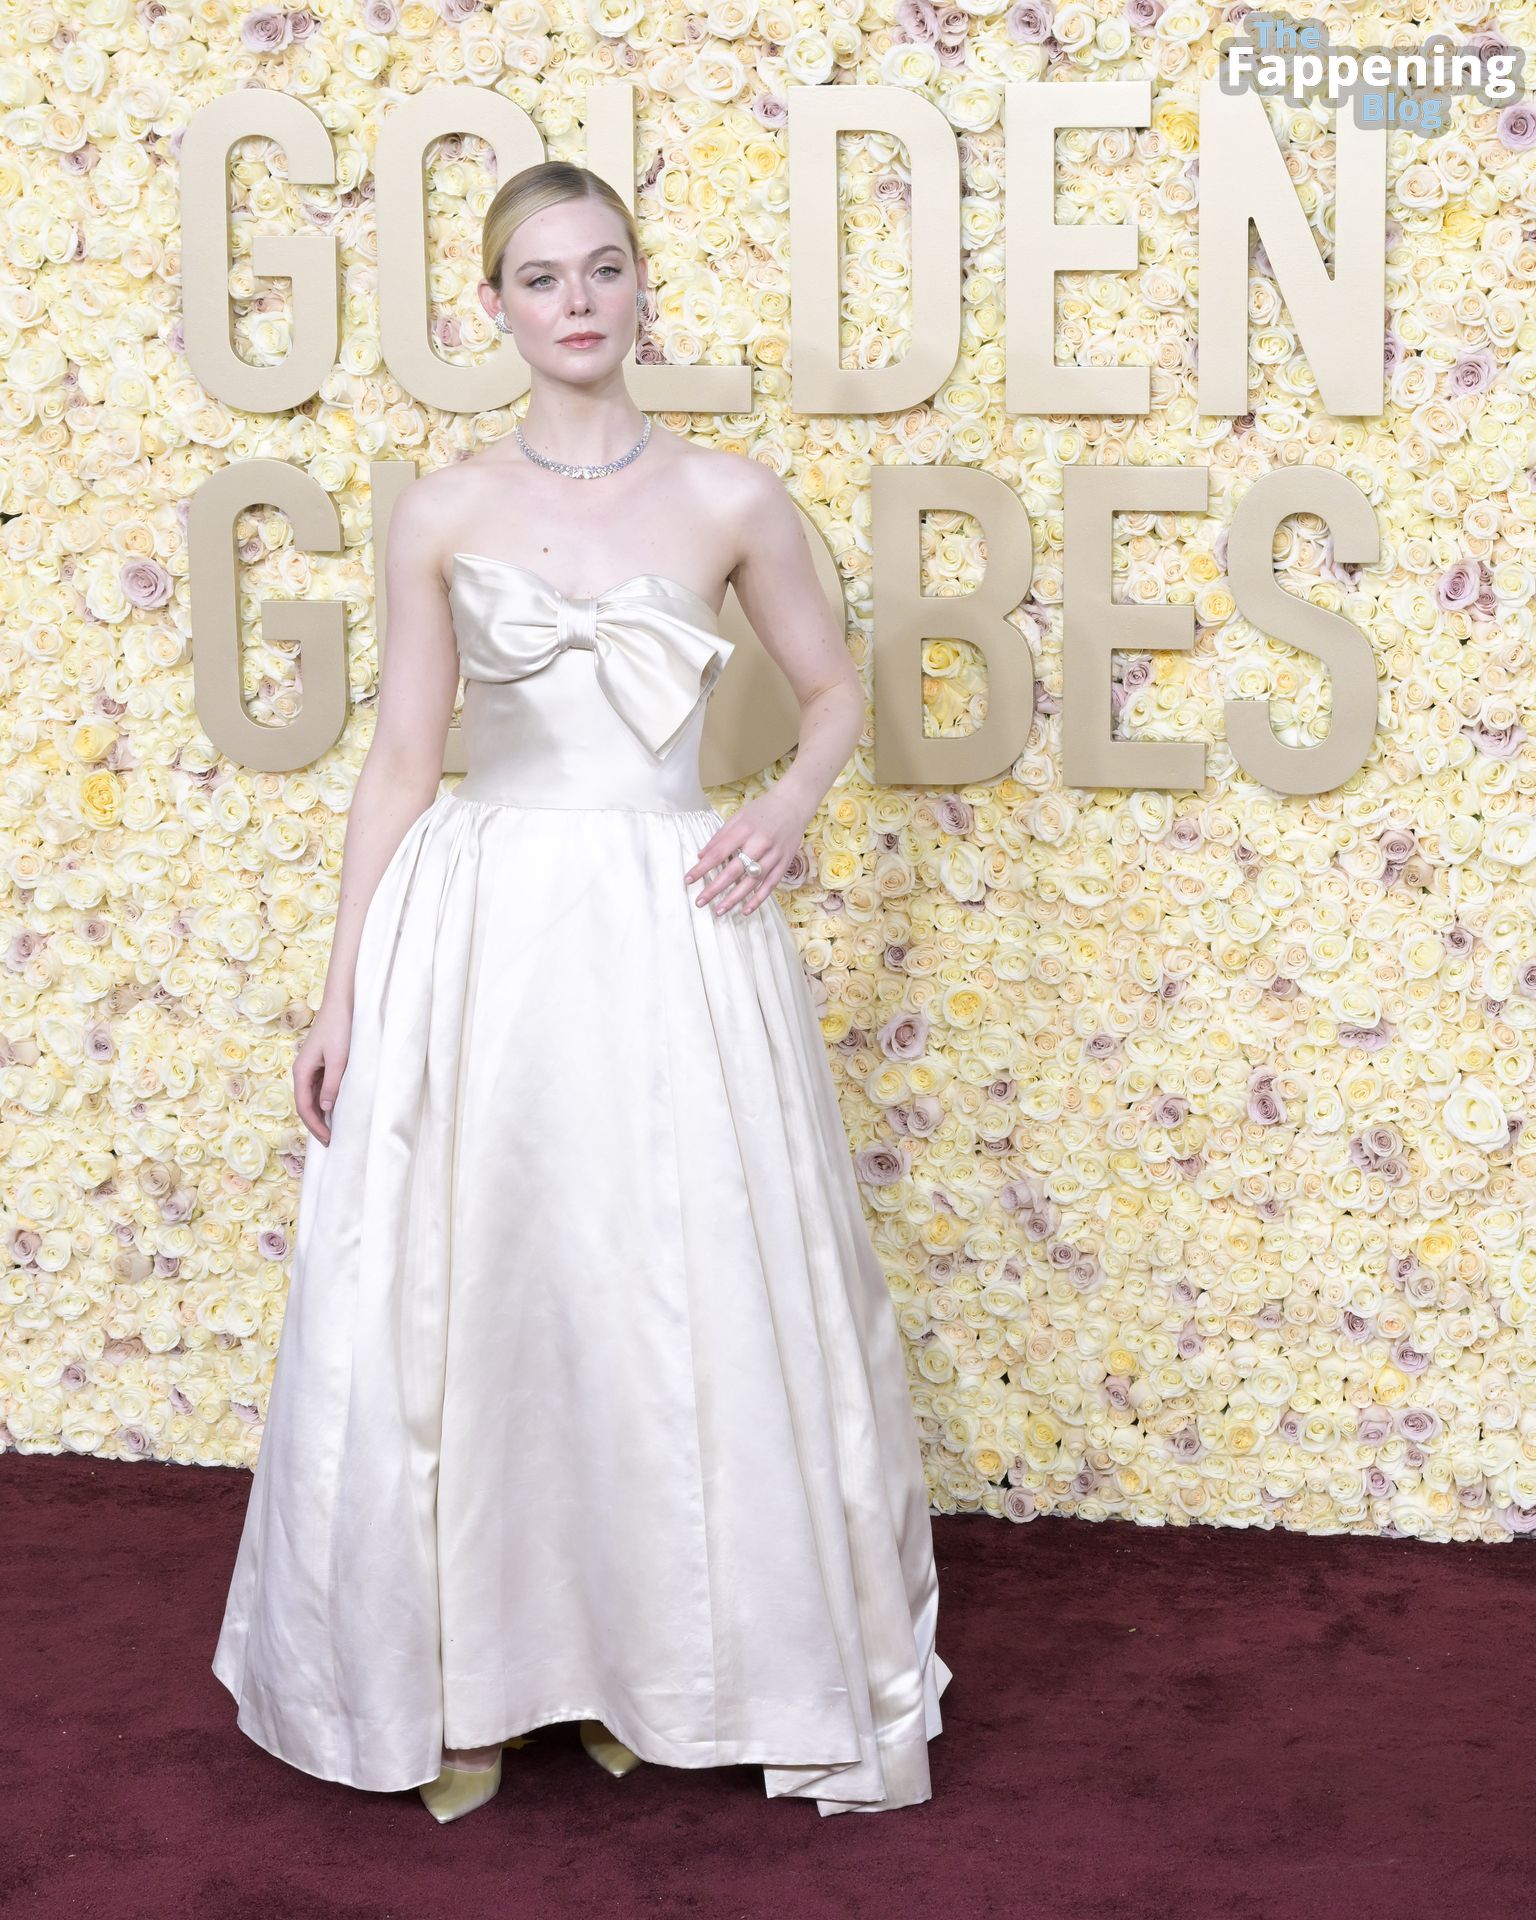 Elle-Fanning-Sexy-34-The-Fappening-Blog.jpg